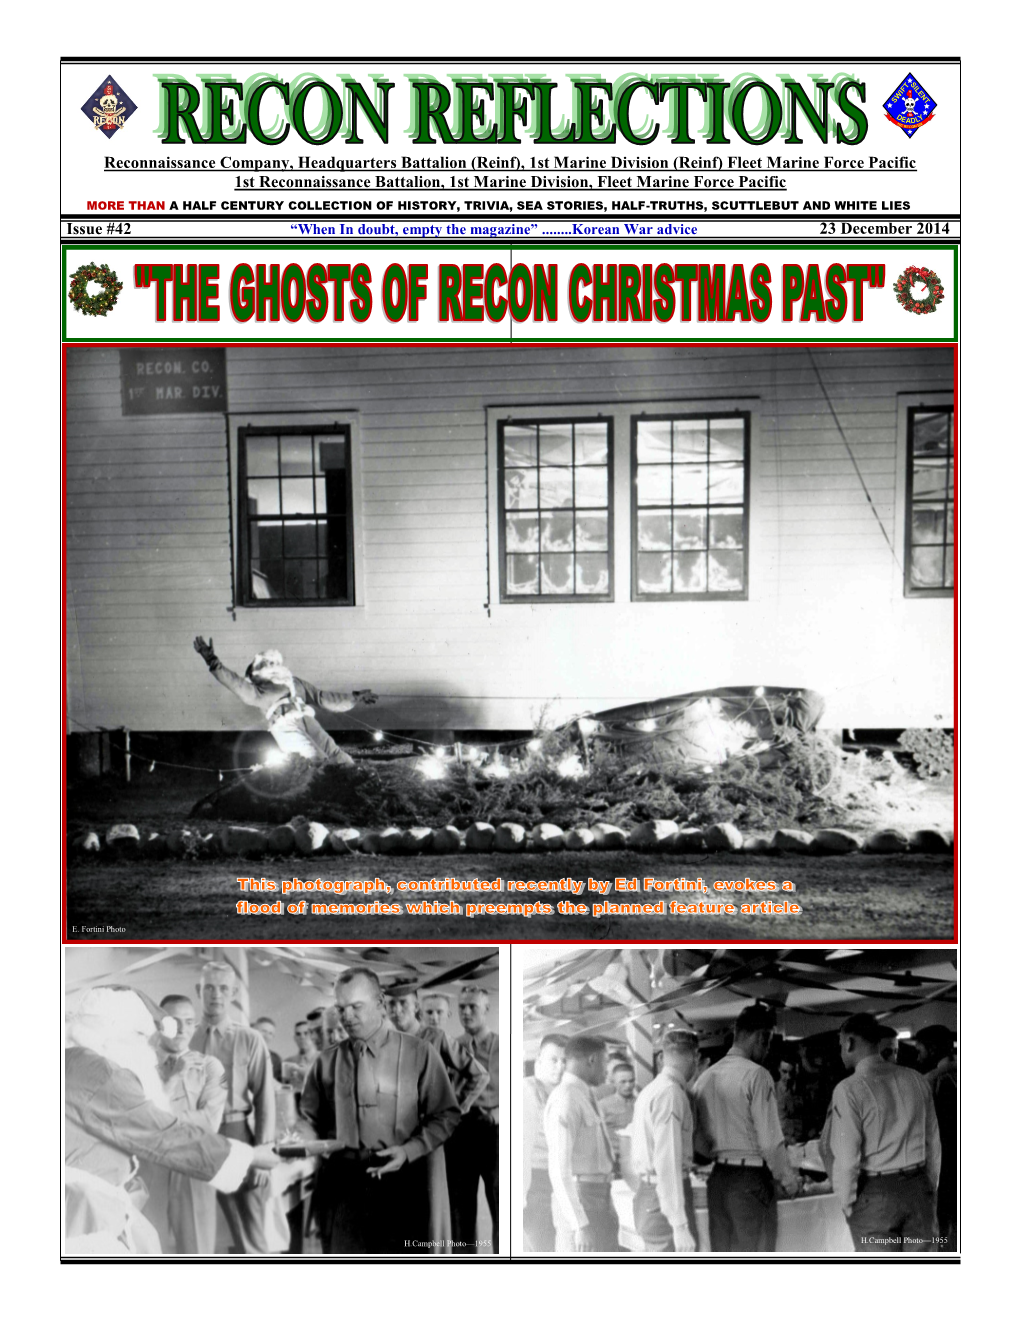 Recon Reflections Issue 42.Pdf